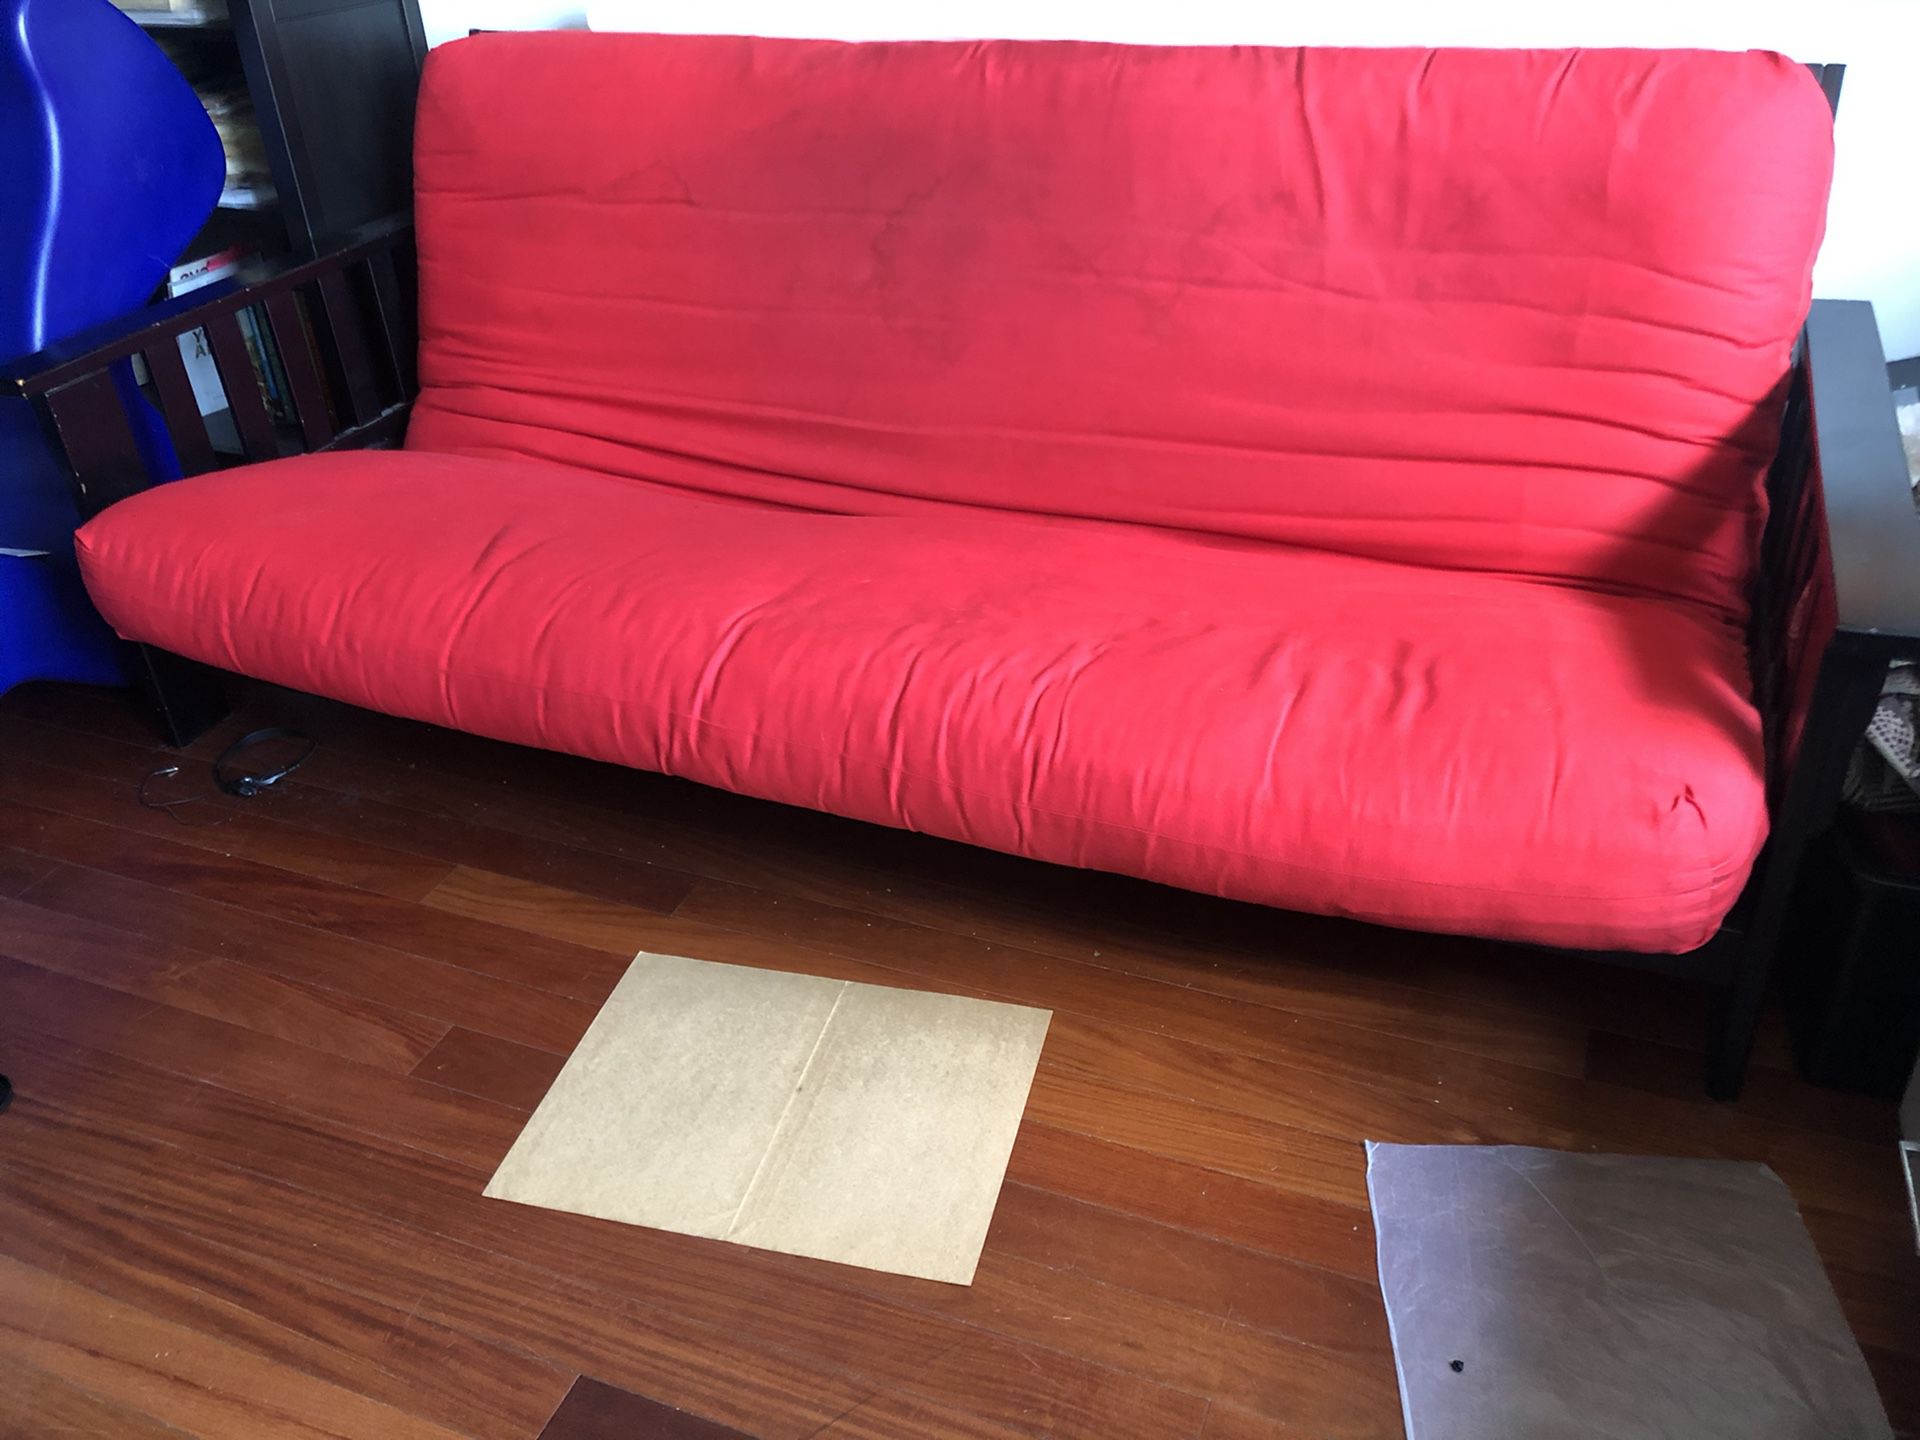 Free futon with base-needs new cover